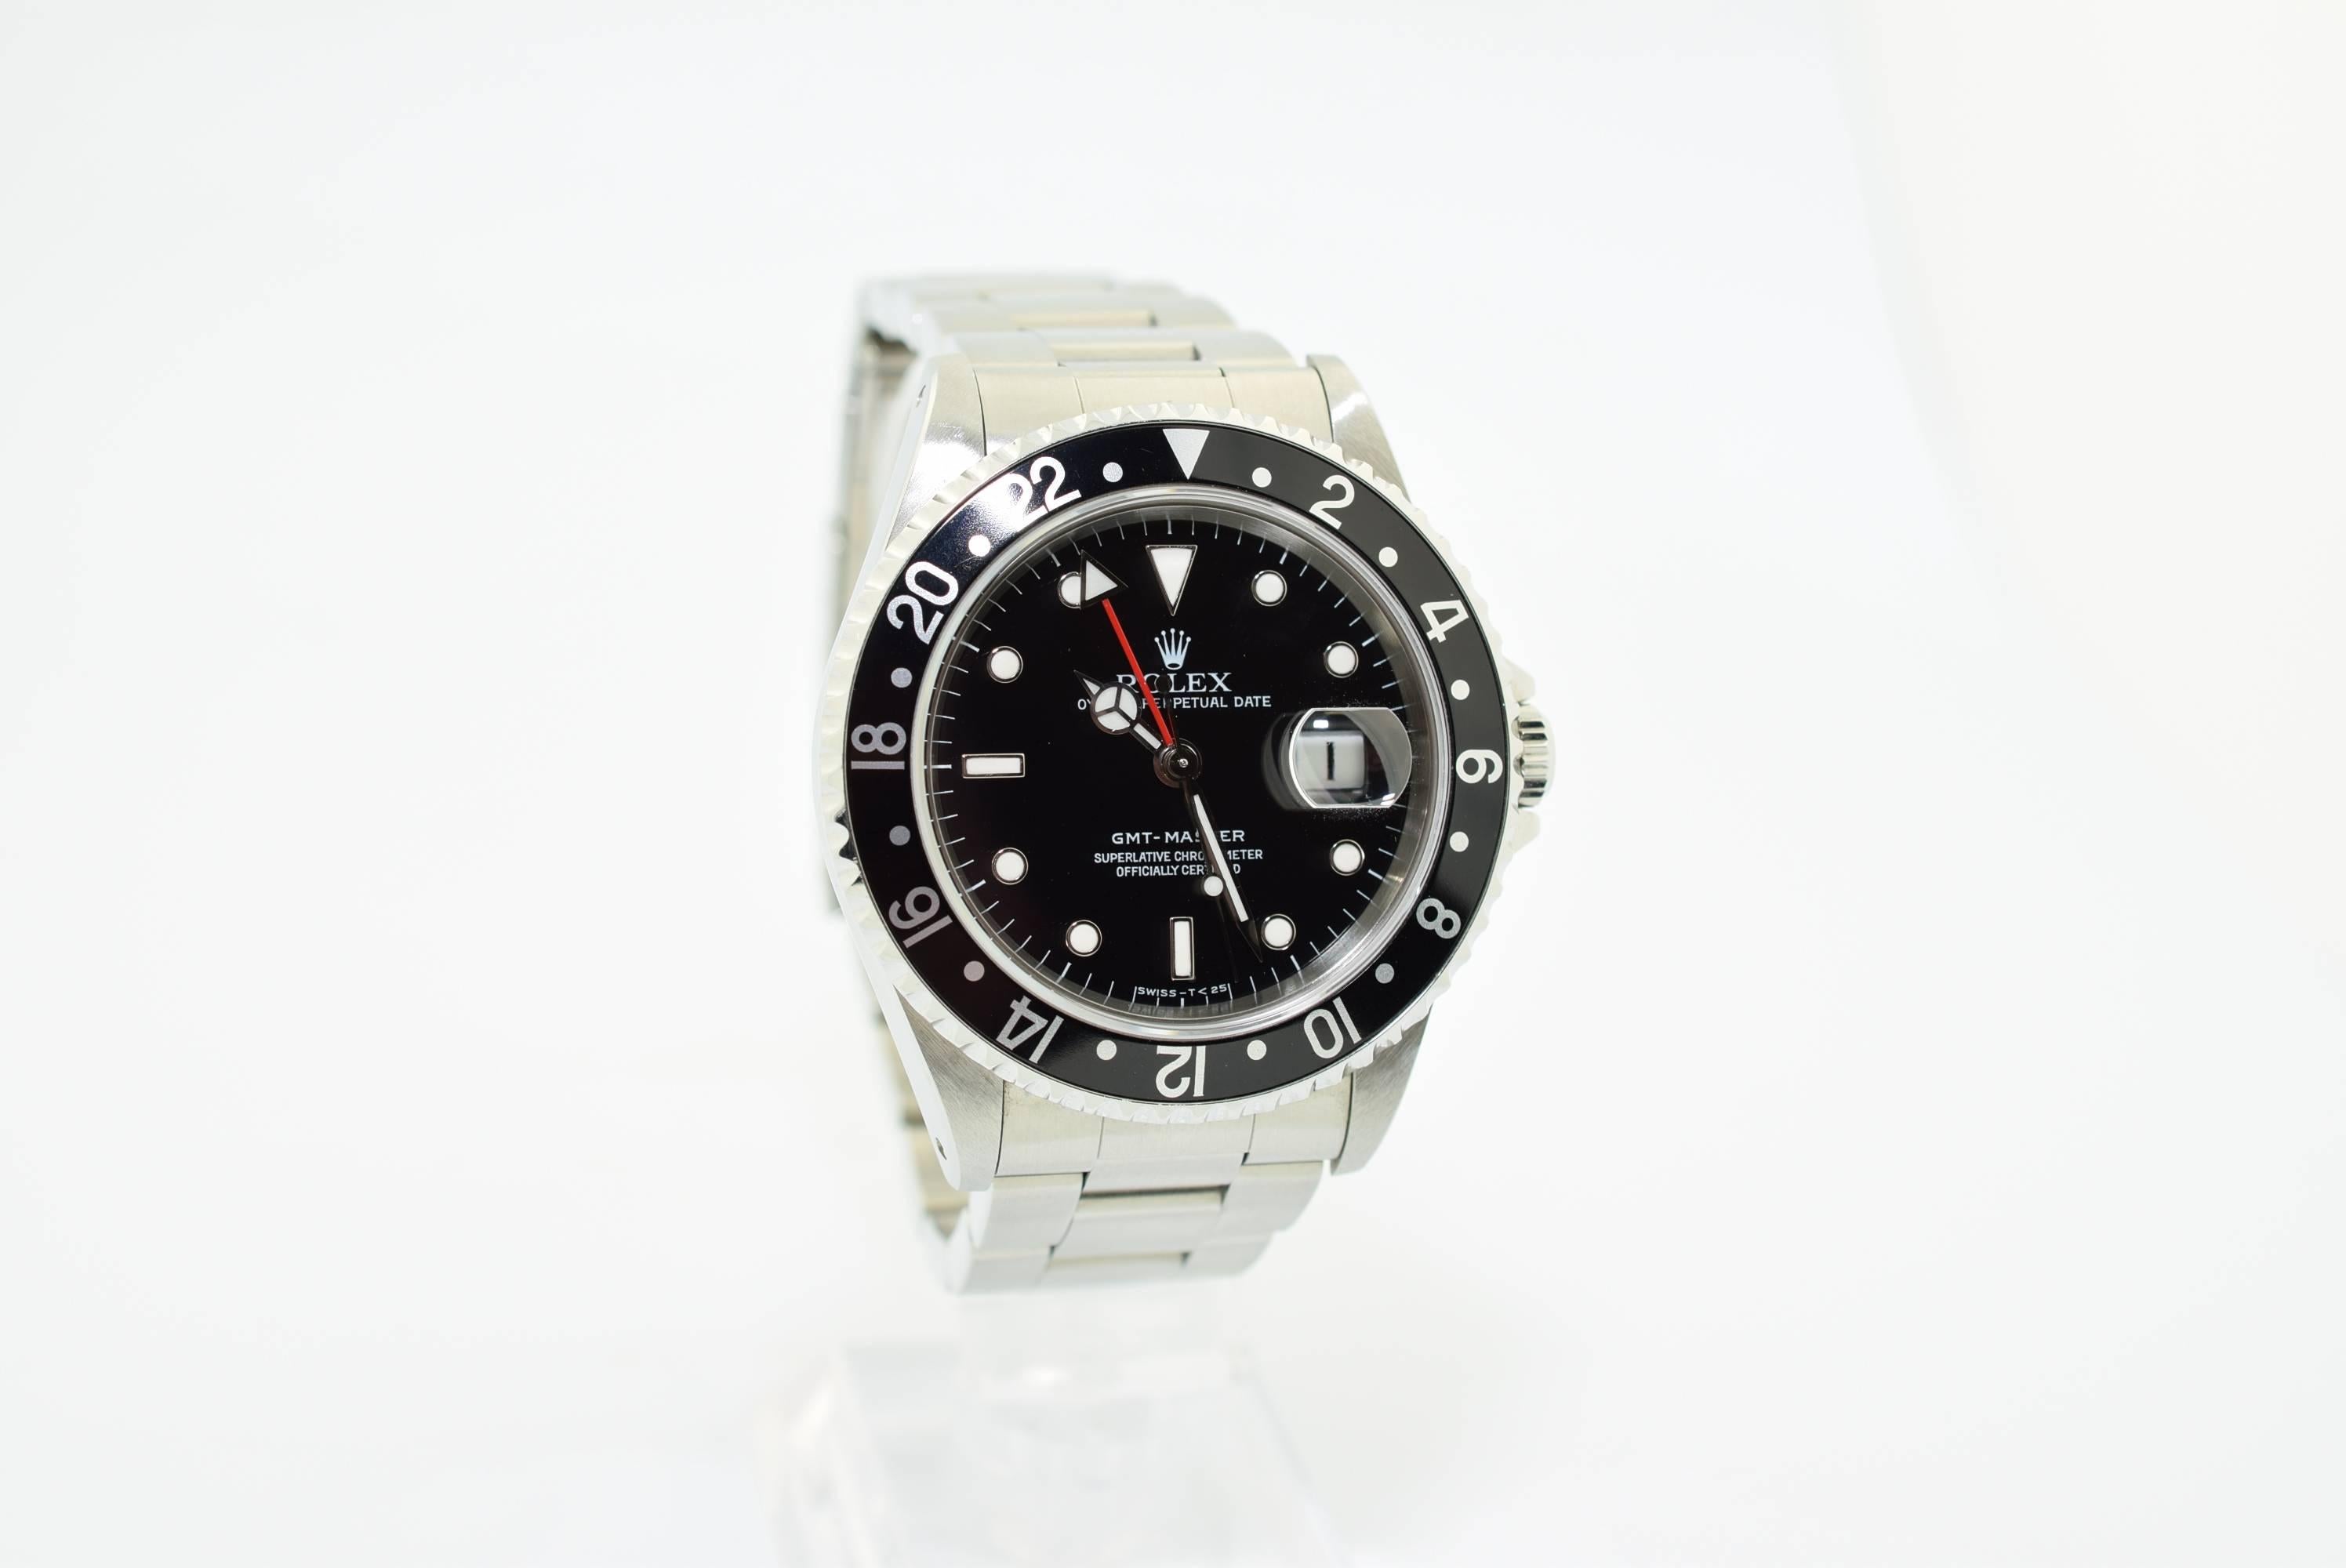 Rolex GMT Master One .Model 16700 .Stainless Steel .W seris with original papers as shown .Comes also with Rolex Box .Circa :1995 .Stainless Steel .39 mm case Diameter .Rolex safety clasp Band .Excellent condition and never out of Fashion and always